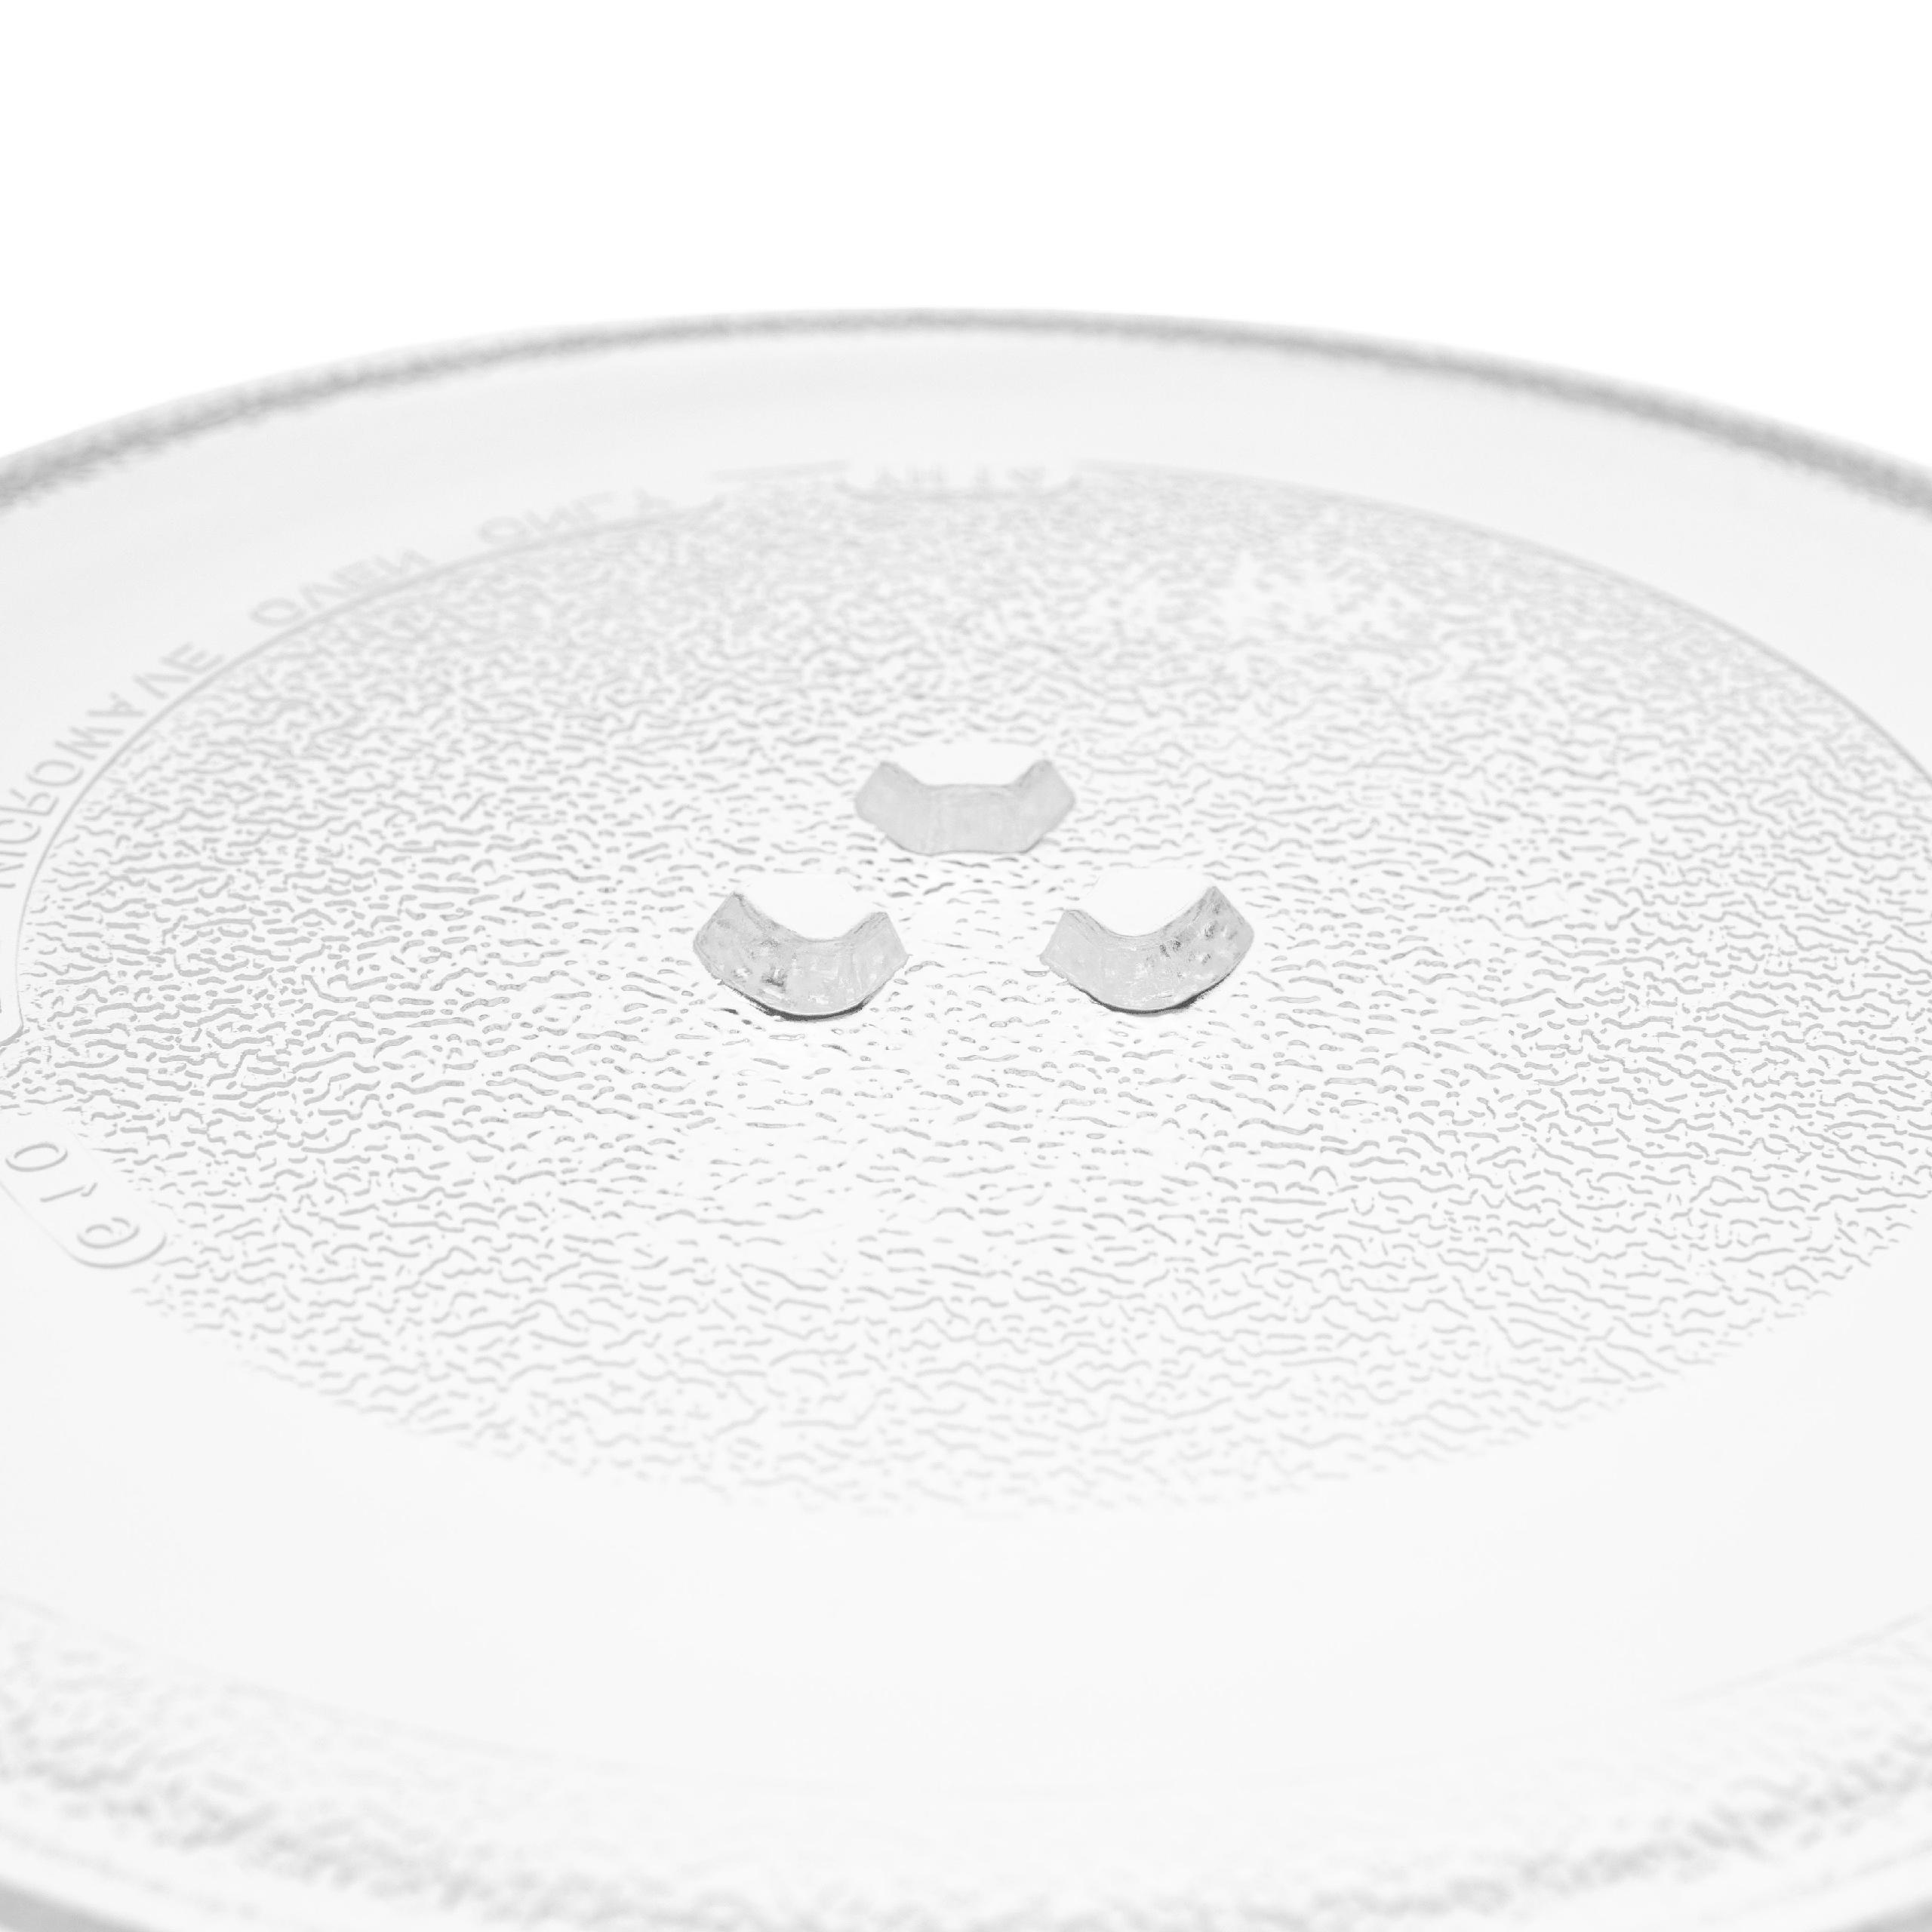 glass microwave plate, rotary plate 25.5cm replaces Bosch 11002491 for Hanseatic microwave etc